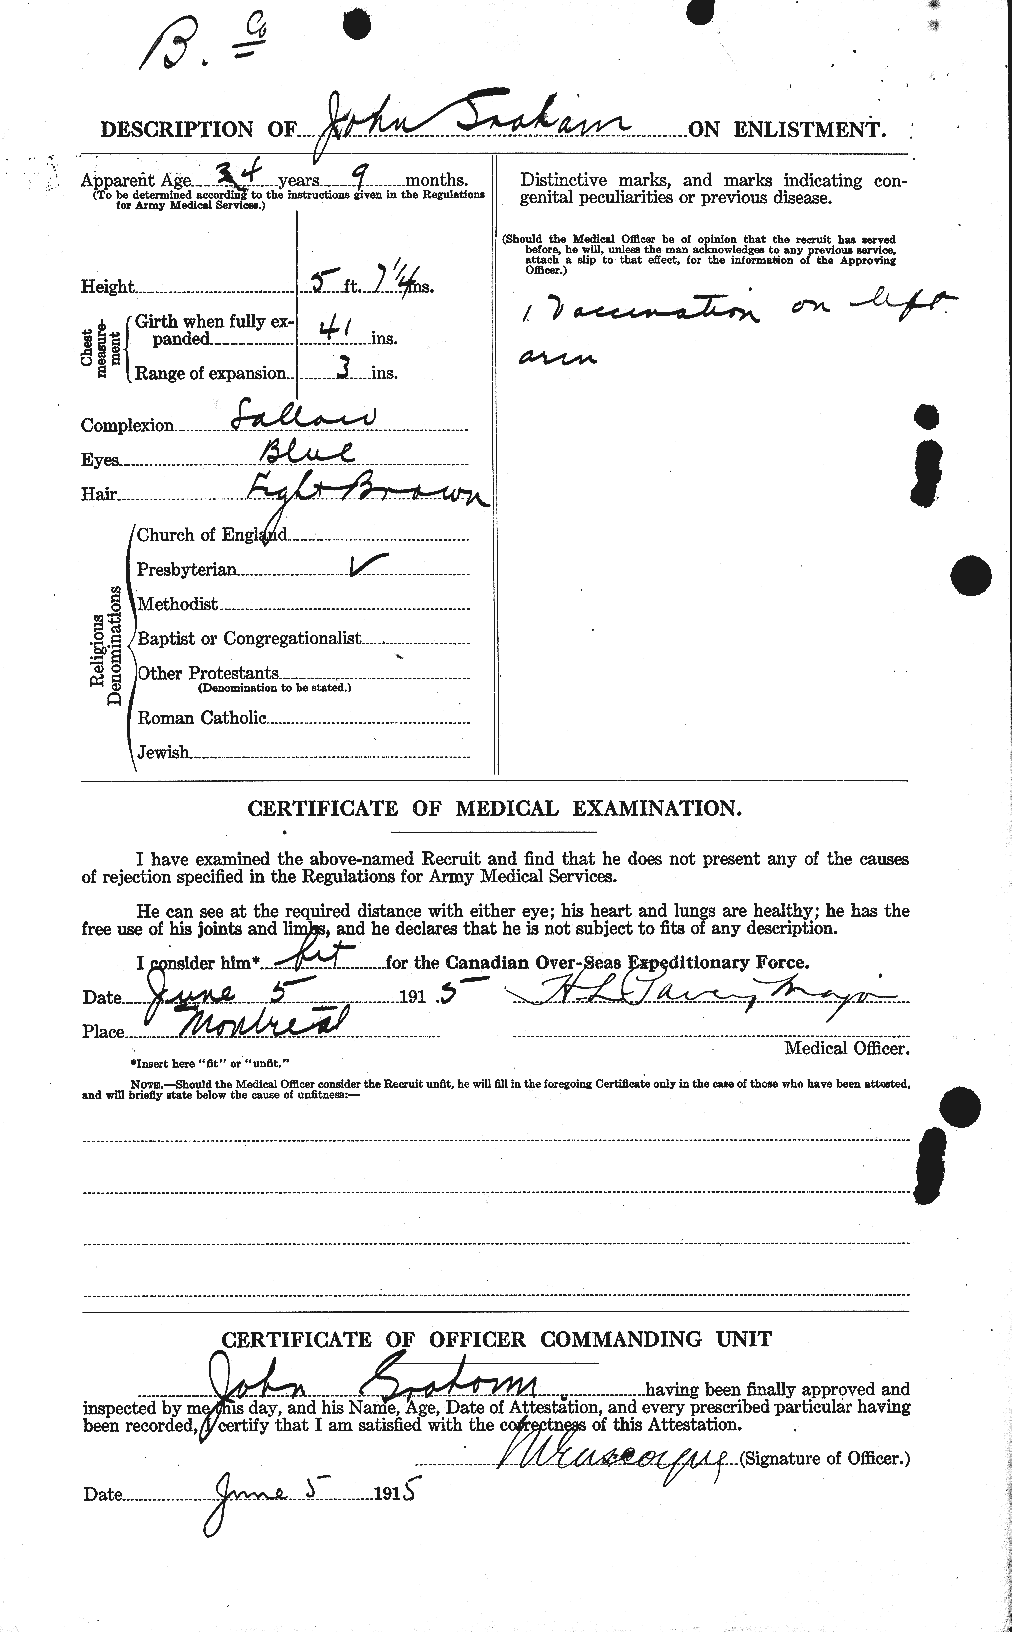 Personnel Records of the First World War - CEF 359131b